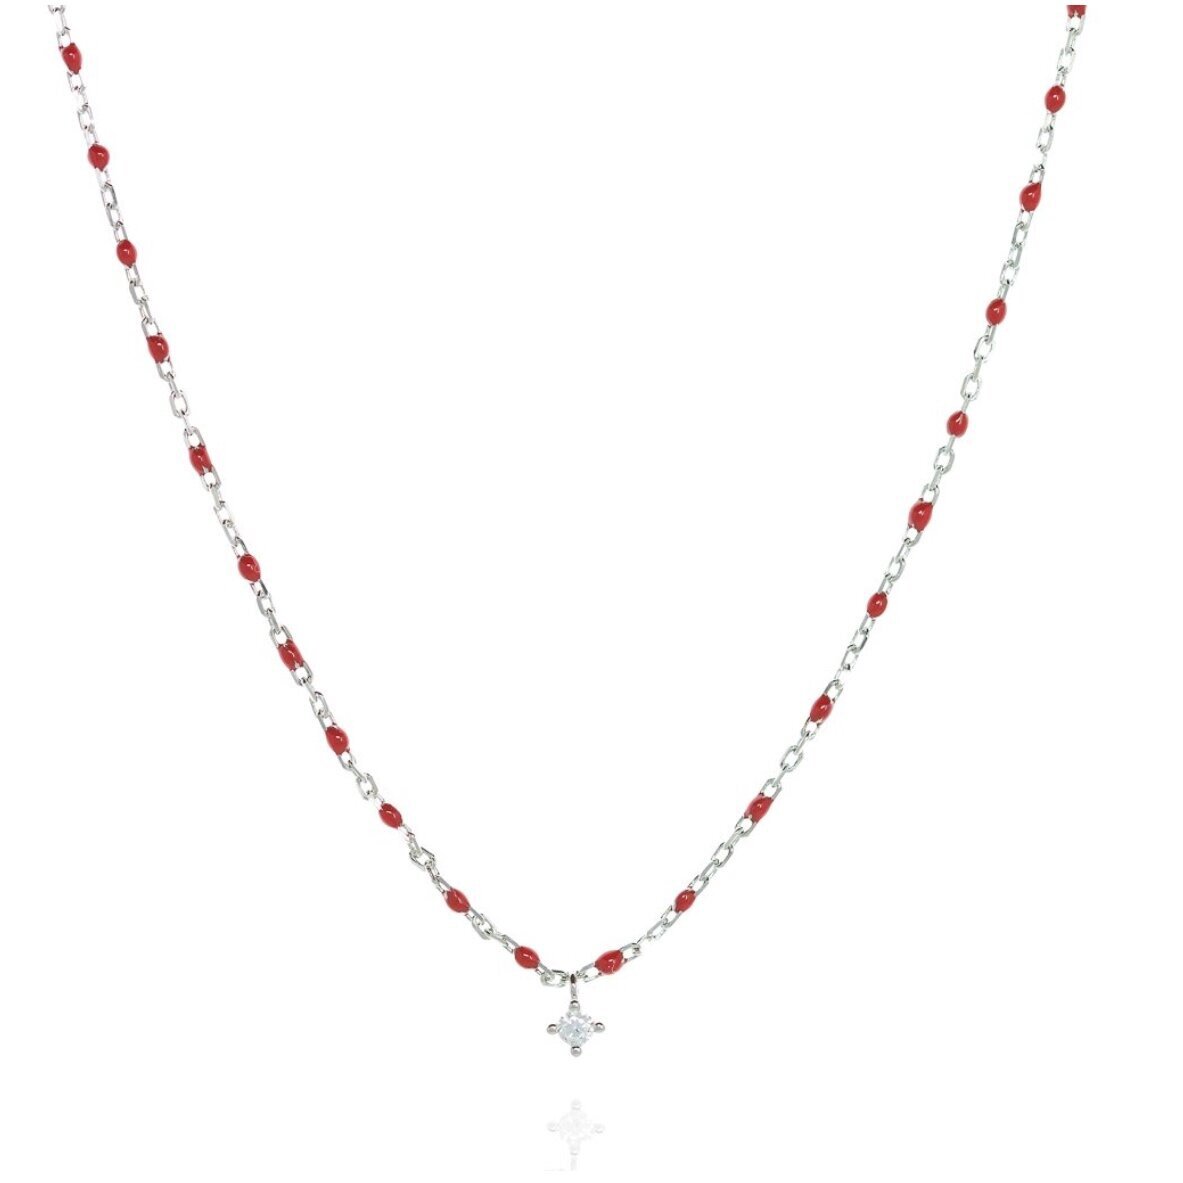 Silver Chain and Bead Necklace - Red